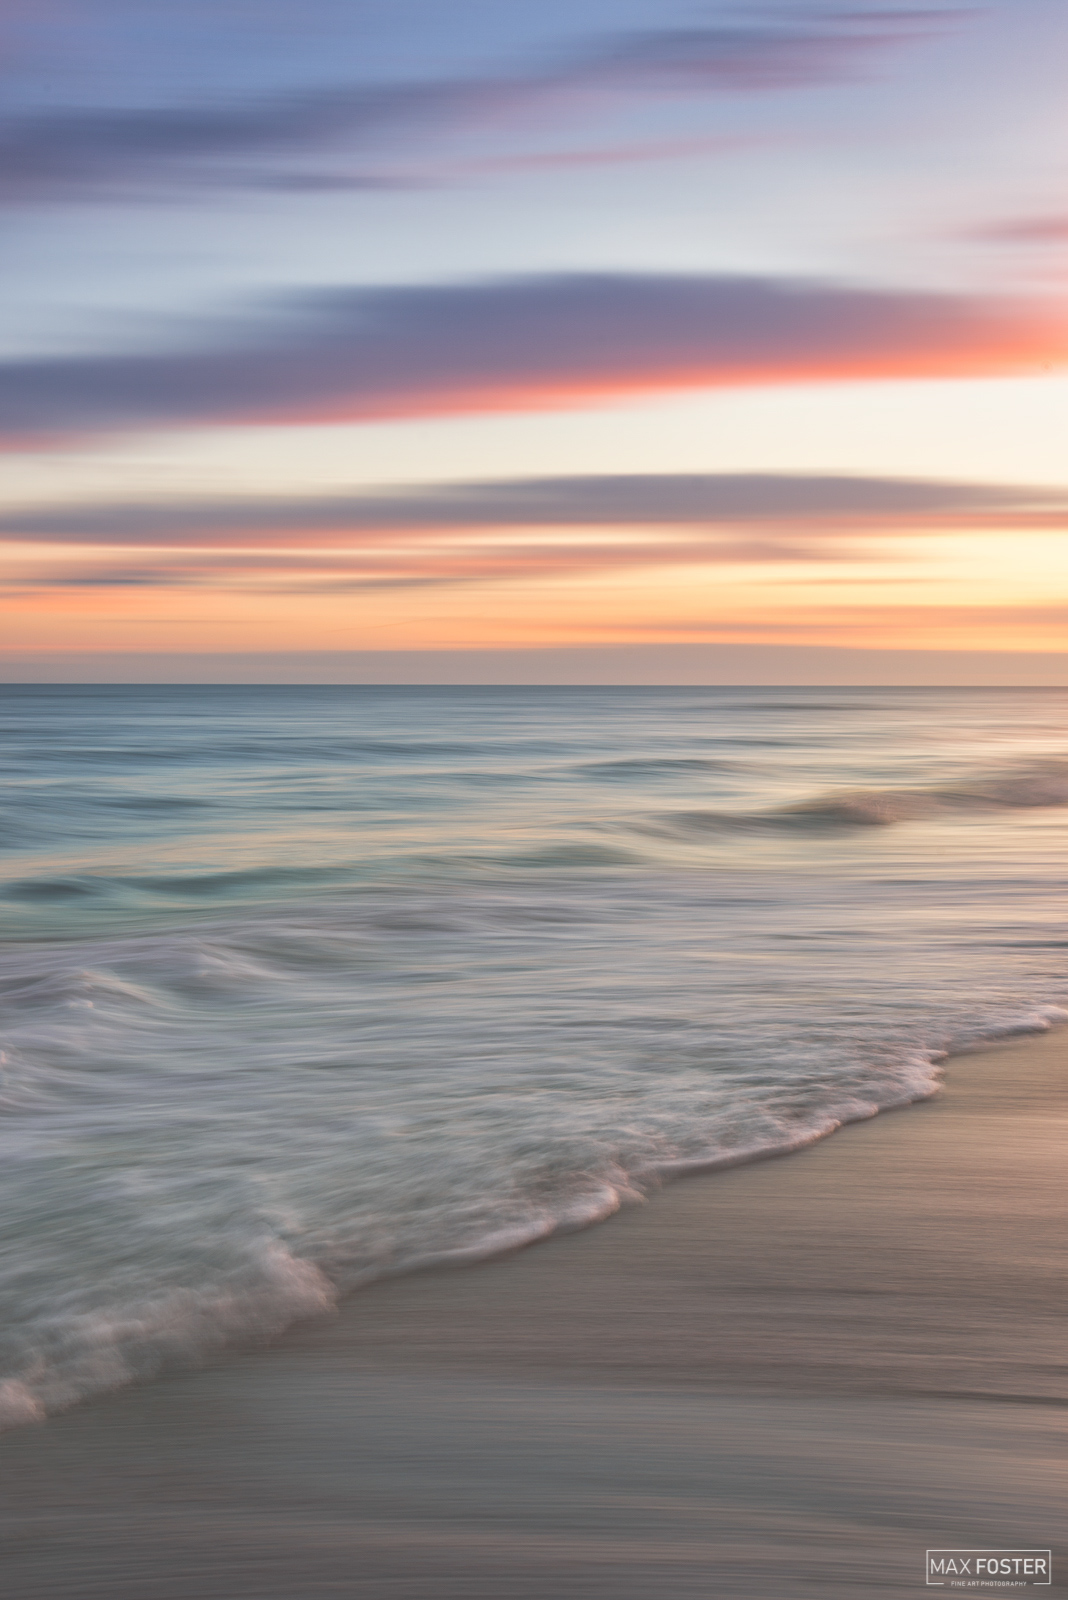 Bring your walls to life with Pastel Seas, Max Foster's limited edition photography print of Sanibel Island, Florida from his...